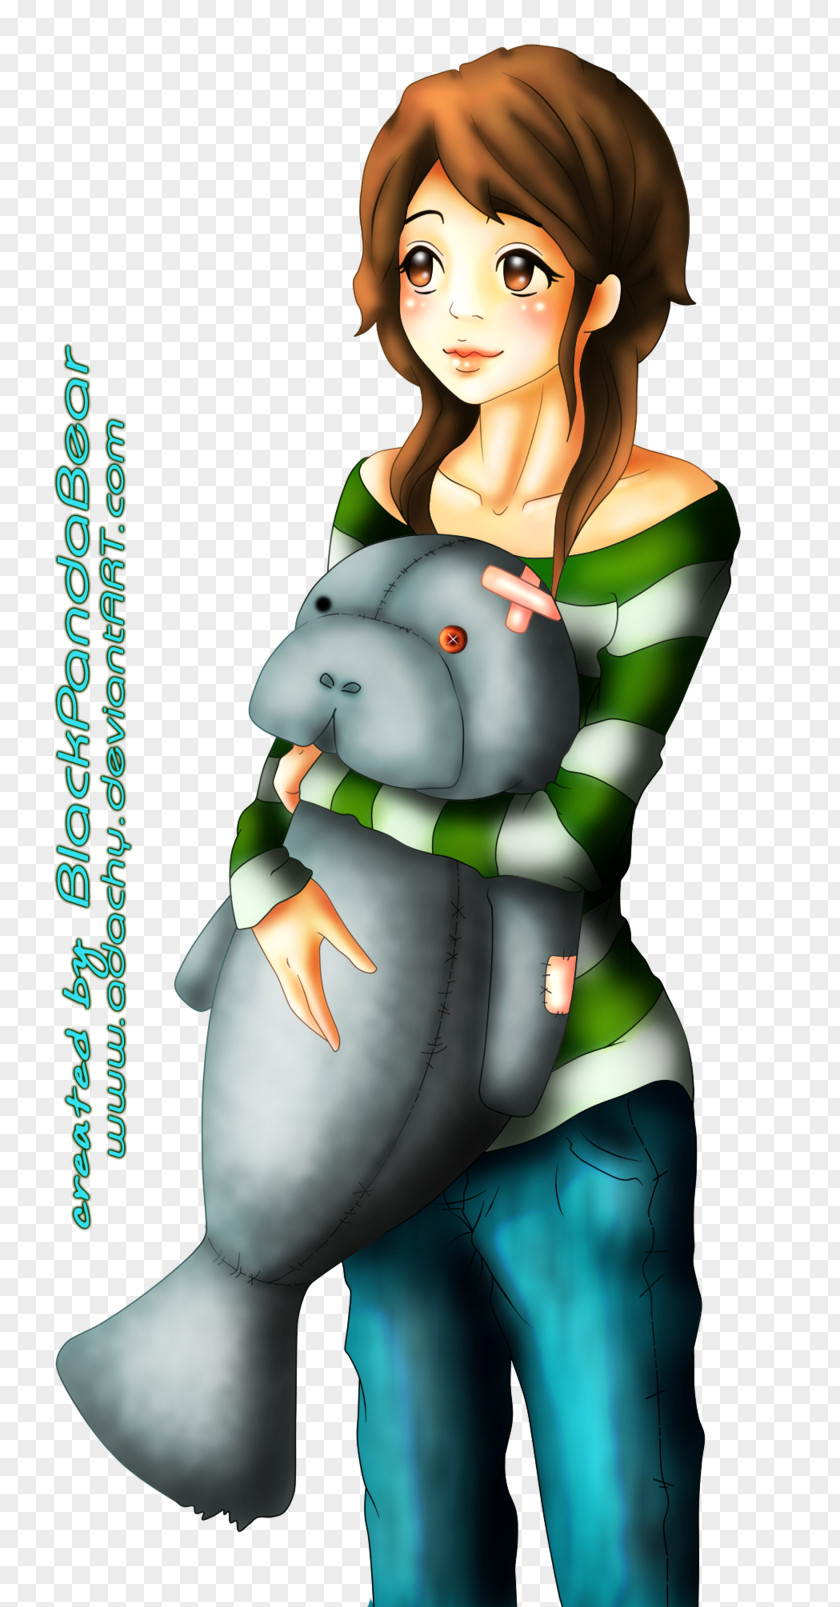 Manatees Child Cuteness Drawing West Indian Manatee Human PNG